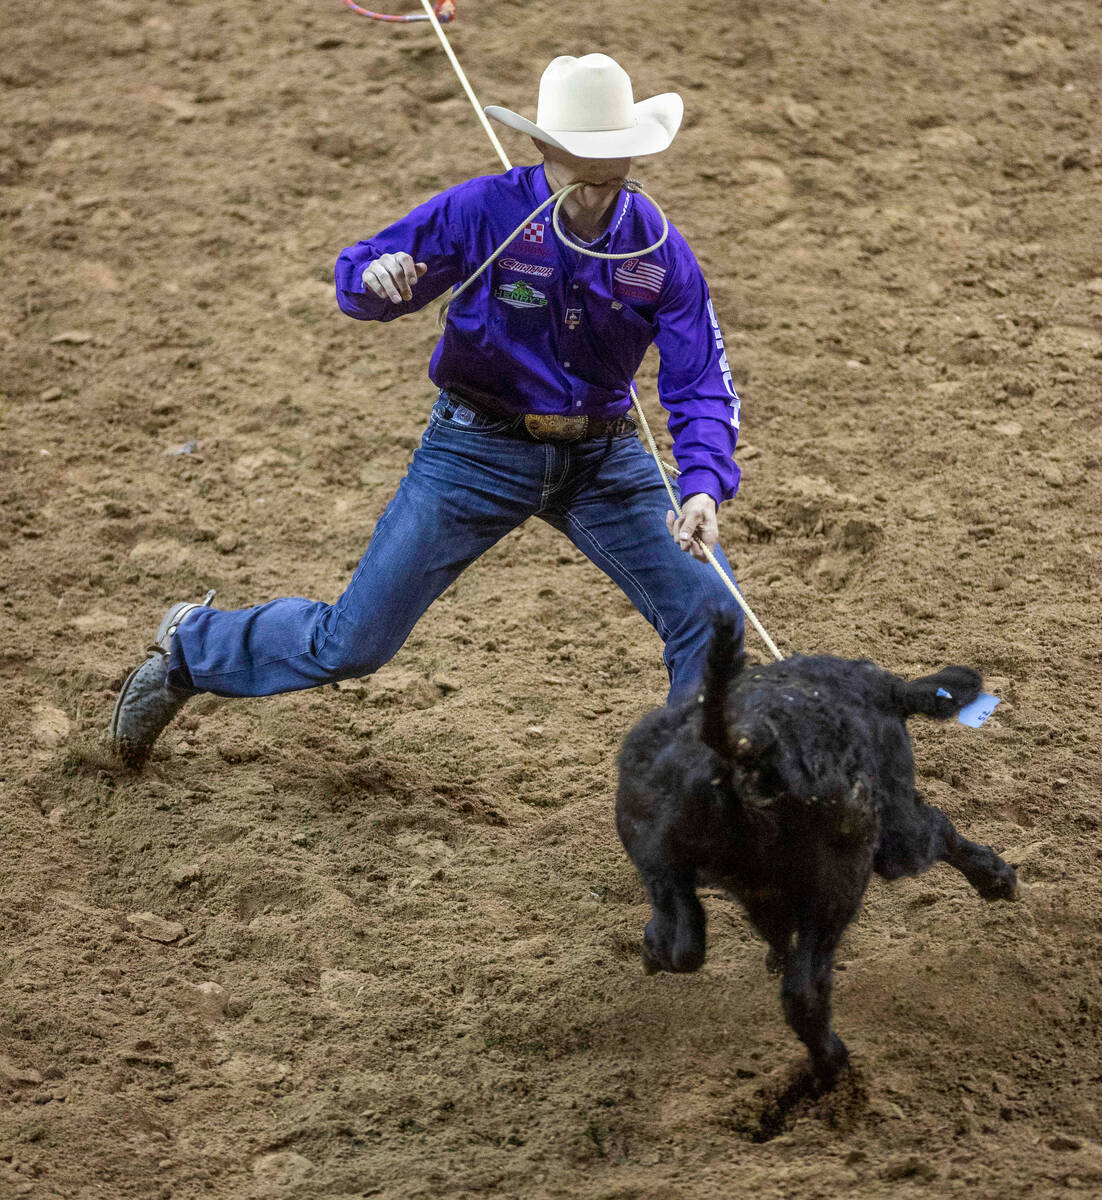 Kincade Henry of Mount Pleasant, TX., approaches a calf as he competes during Tie-Down Roping i ...